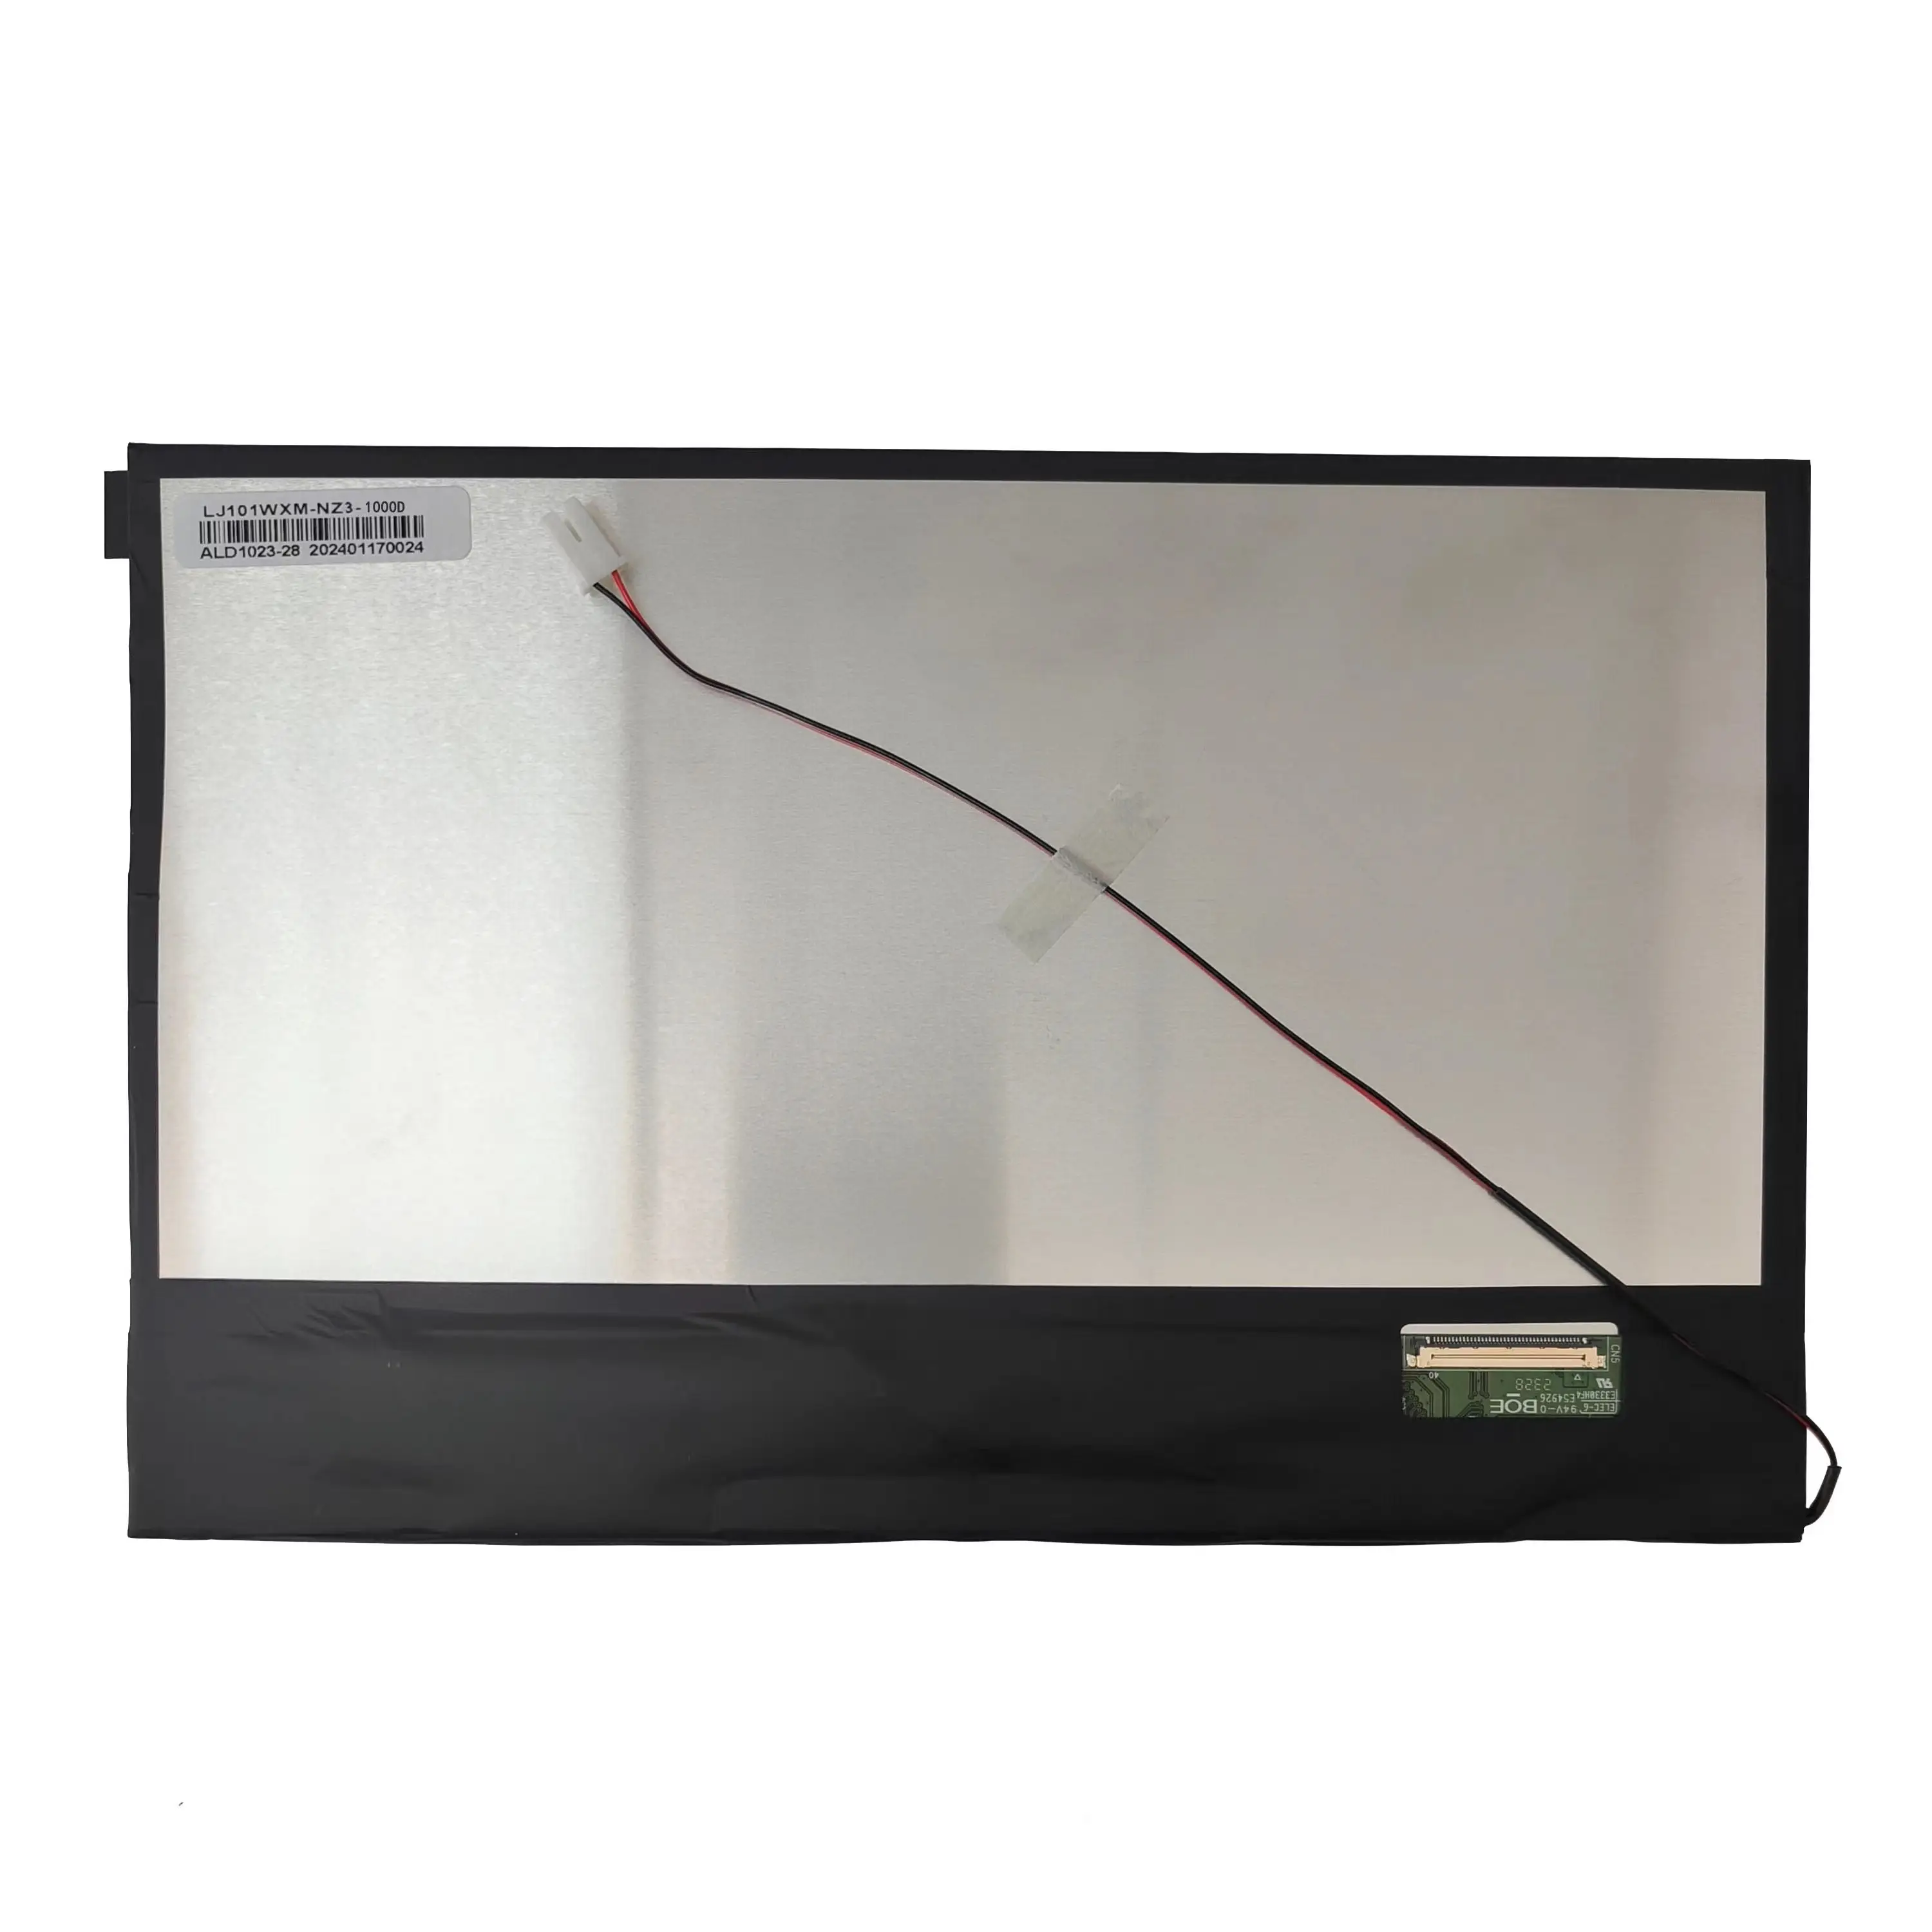 BOE Bright LCD Panel with Capacitive 10-Point Touch Model YW-101G017 LJ101WXM-NZ3-1000D Product Category Touch Screen